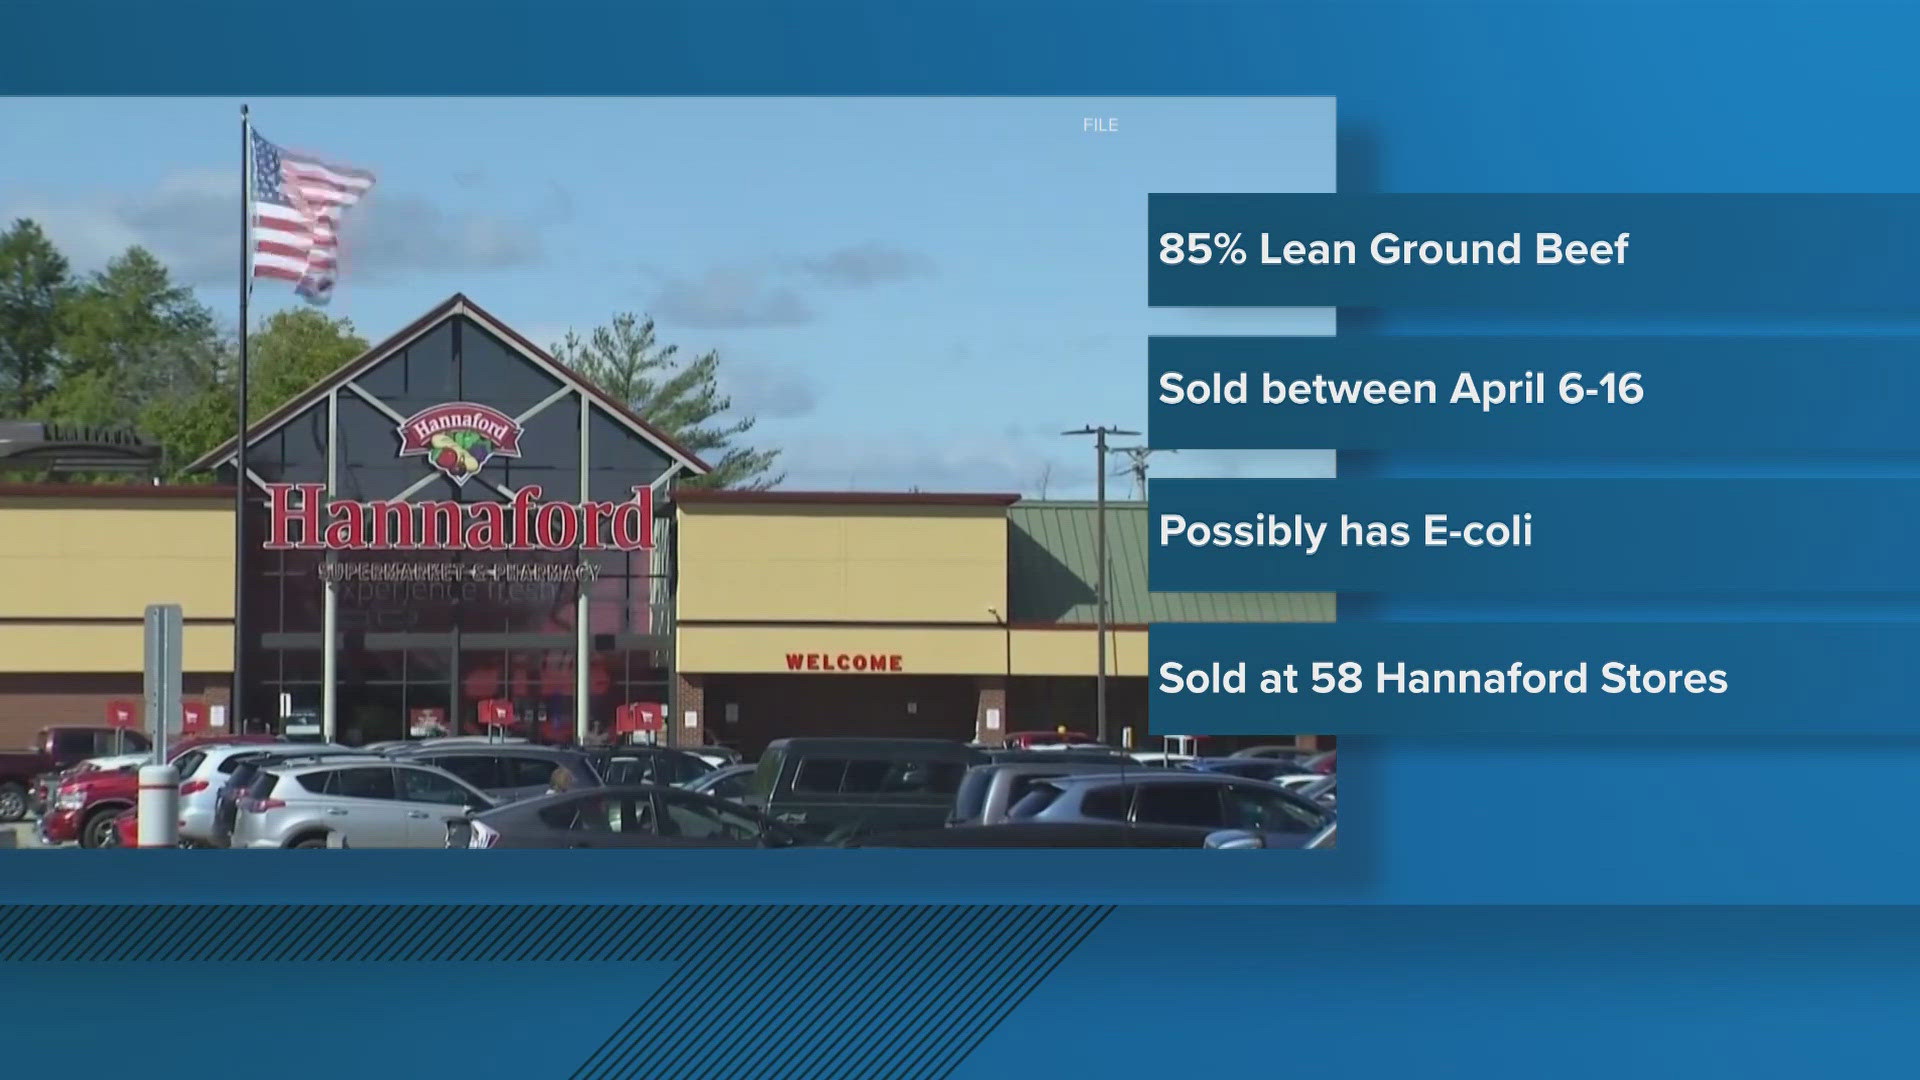 The recall extends to select Hannaford stores in Maine, New Hampshire, and Massachusetts.